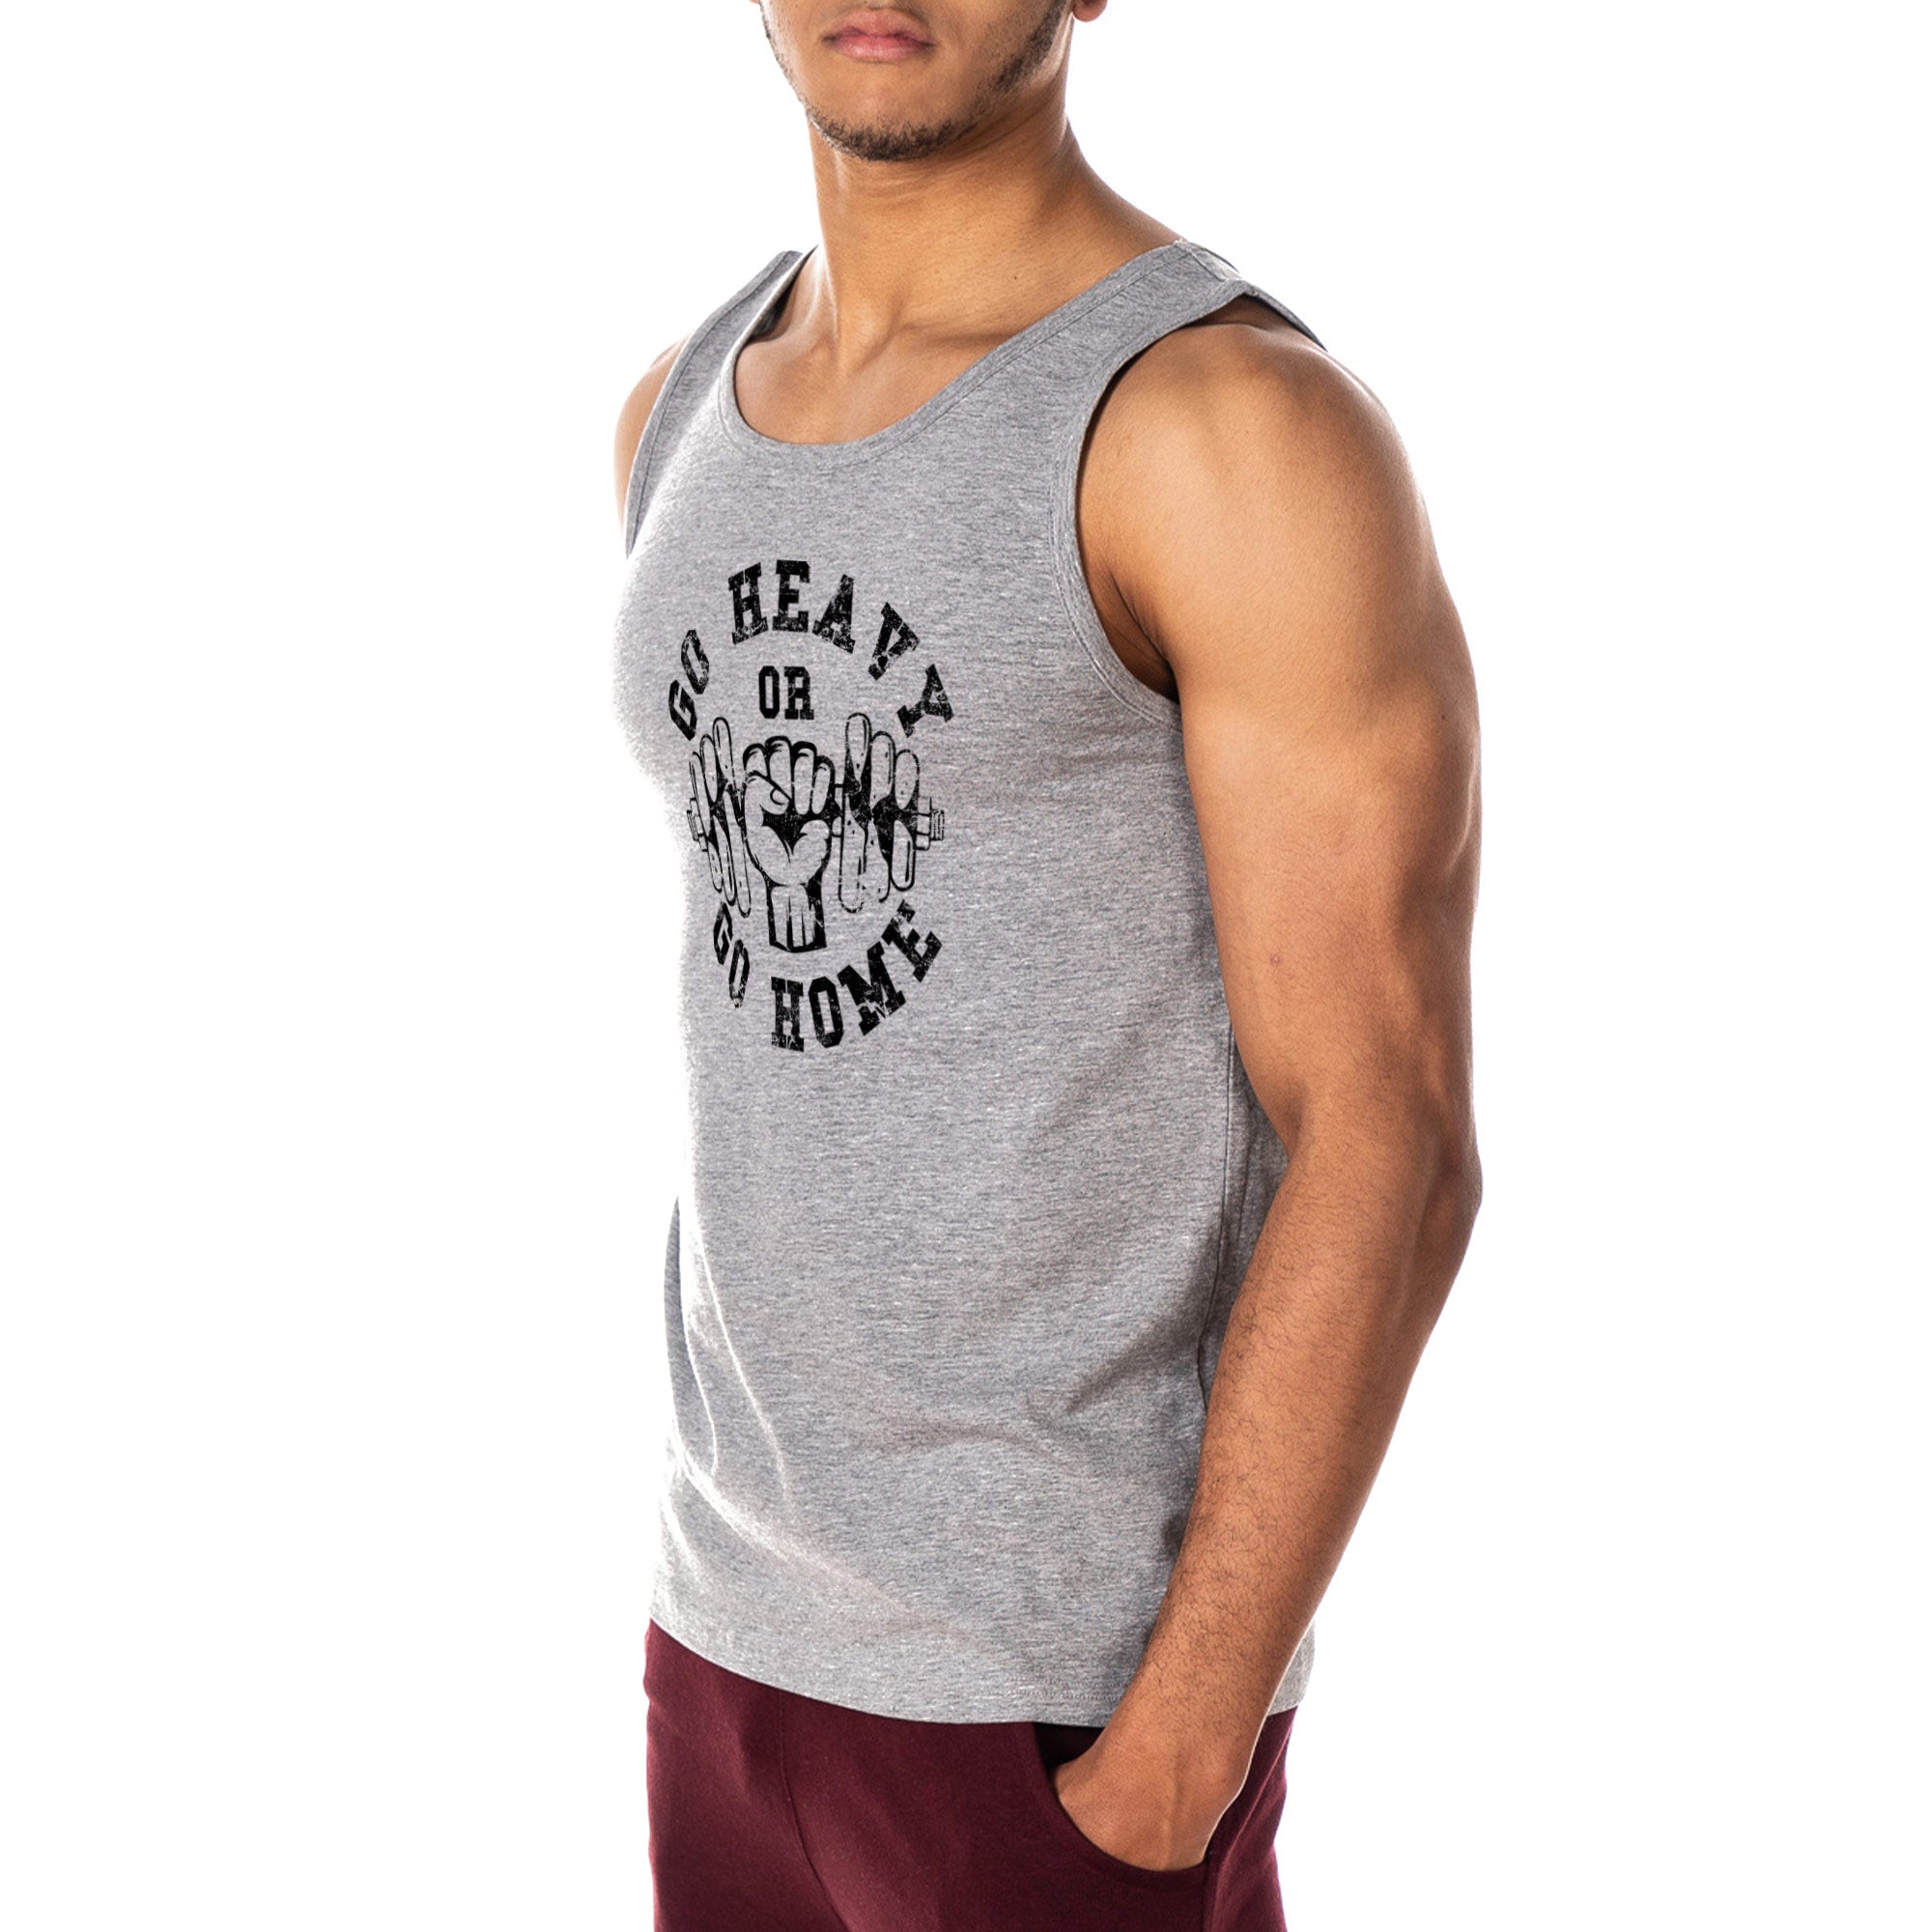 Go Heavy Or Go Home Gym Vest